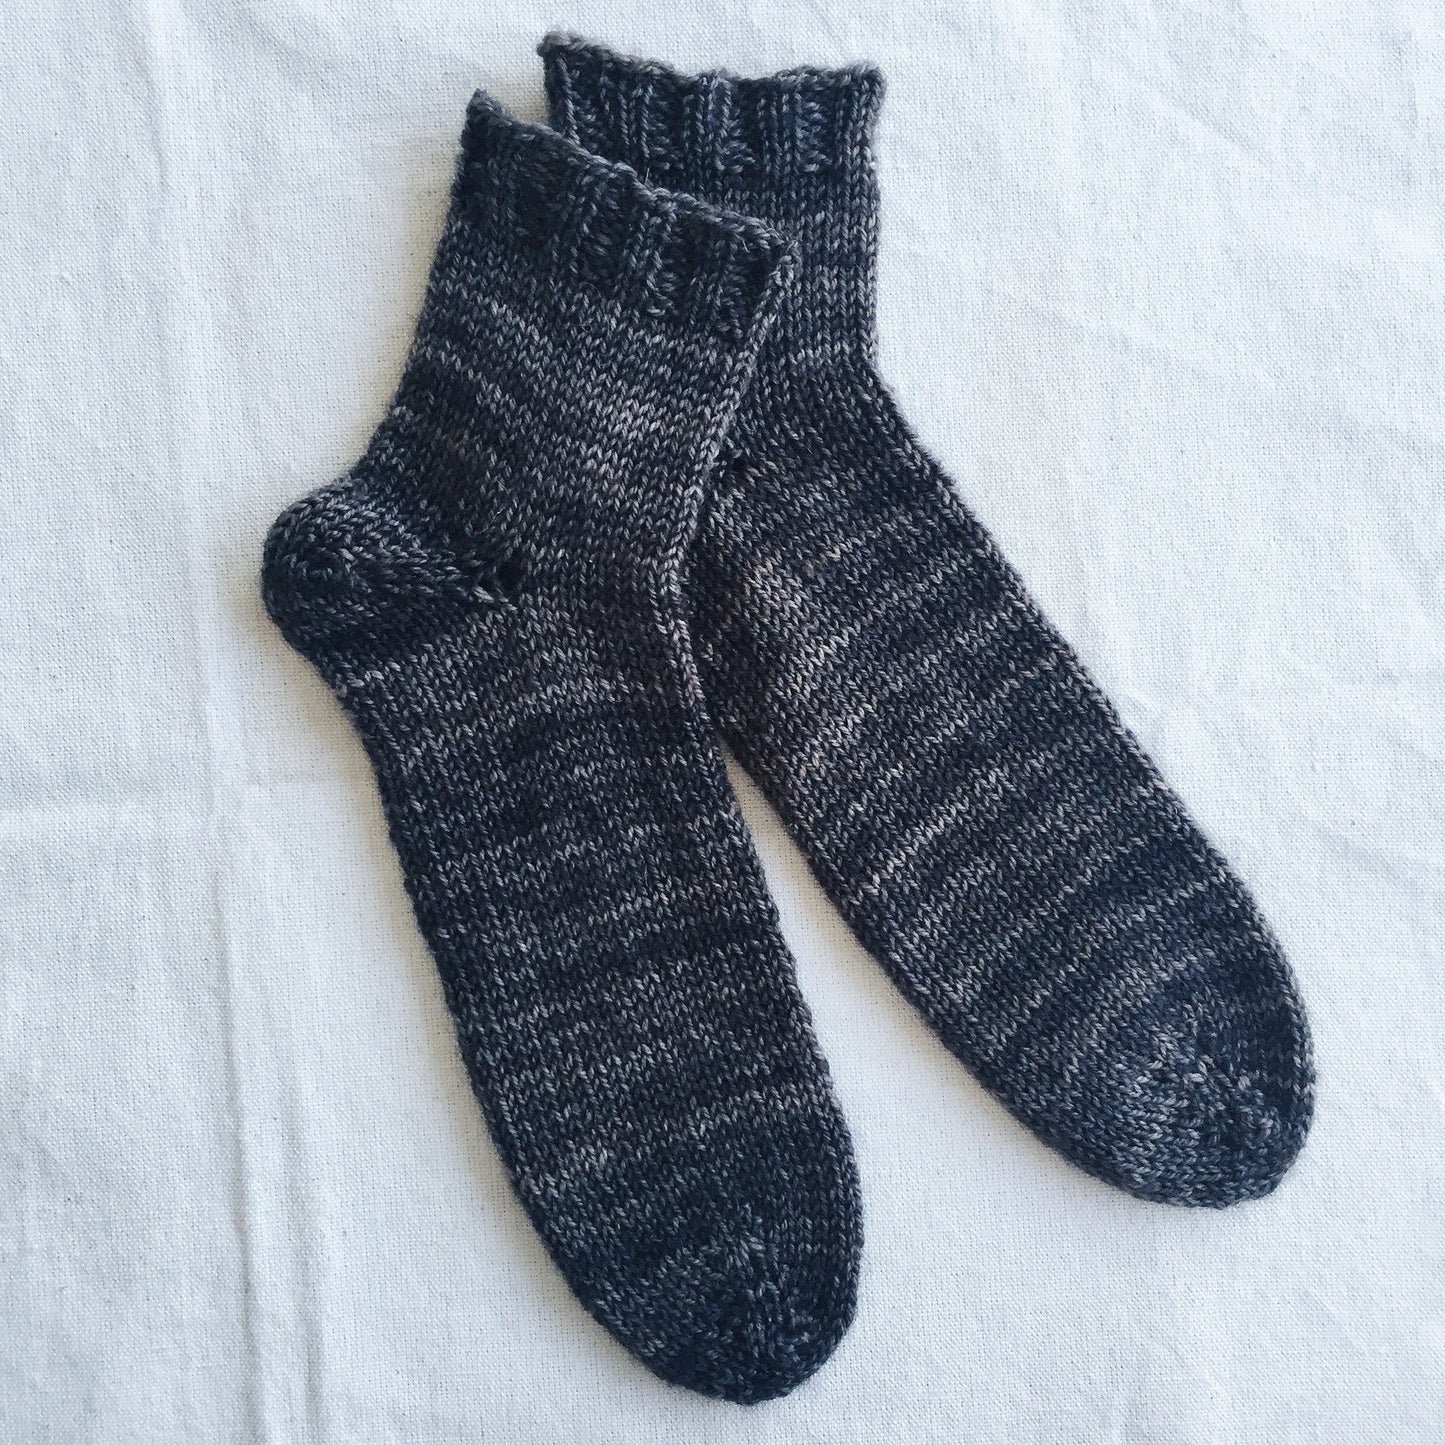 MAD | TOSH Pattern Afterthought Socks